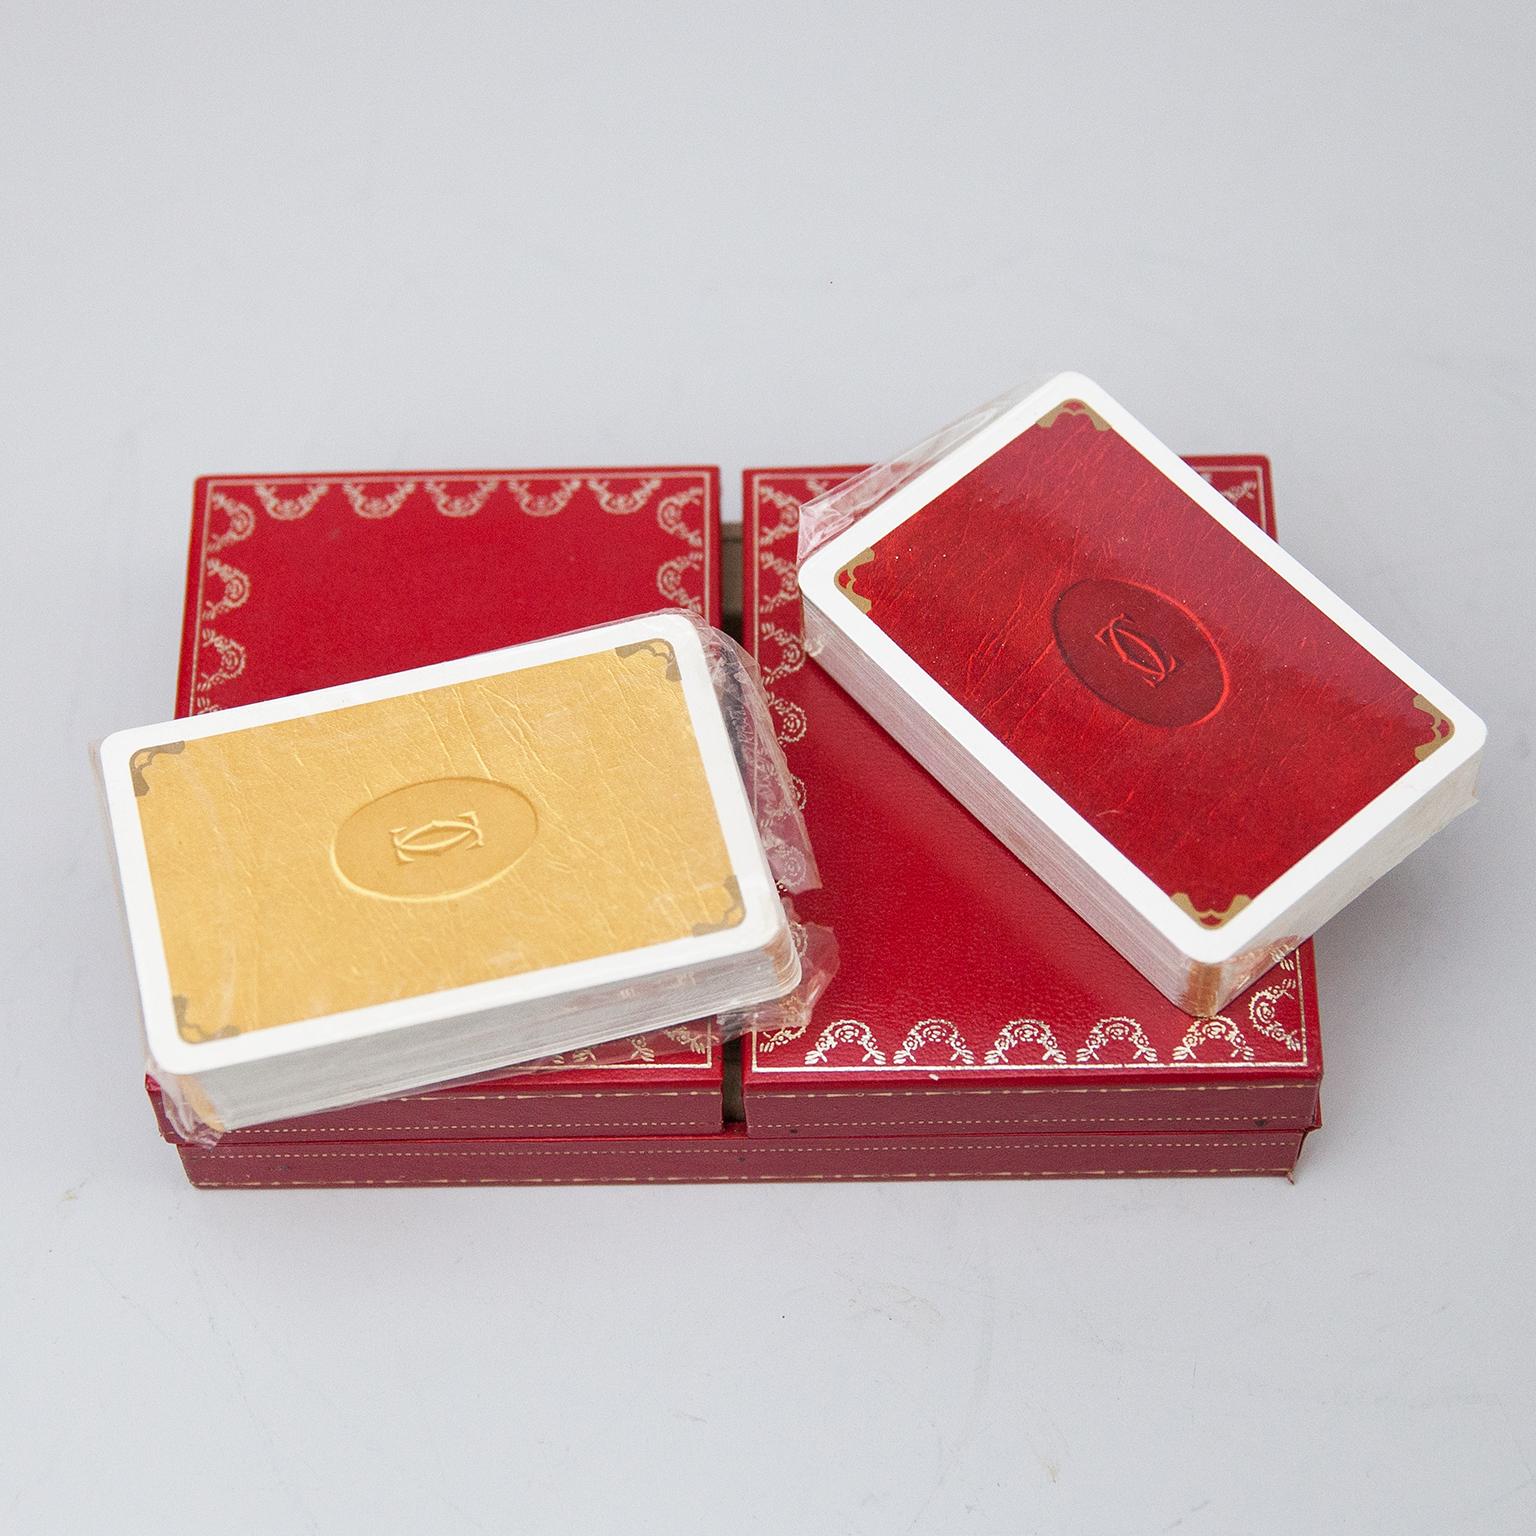 Never in use Cartier playing cards box, one deck plus joker, poker, bridge playing cards in Cartier red 2-doors case. Les Must de Cartier playing cards were only sold from 1972-1976. The silk-lined box of cards with 18-karat gilded corners, printed